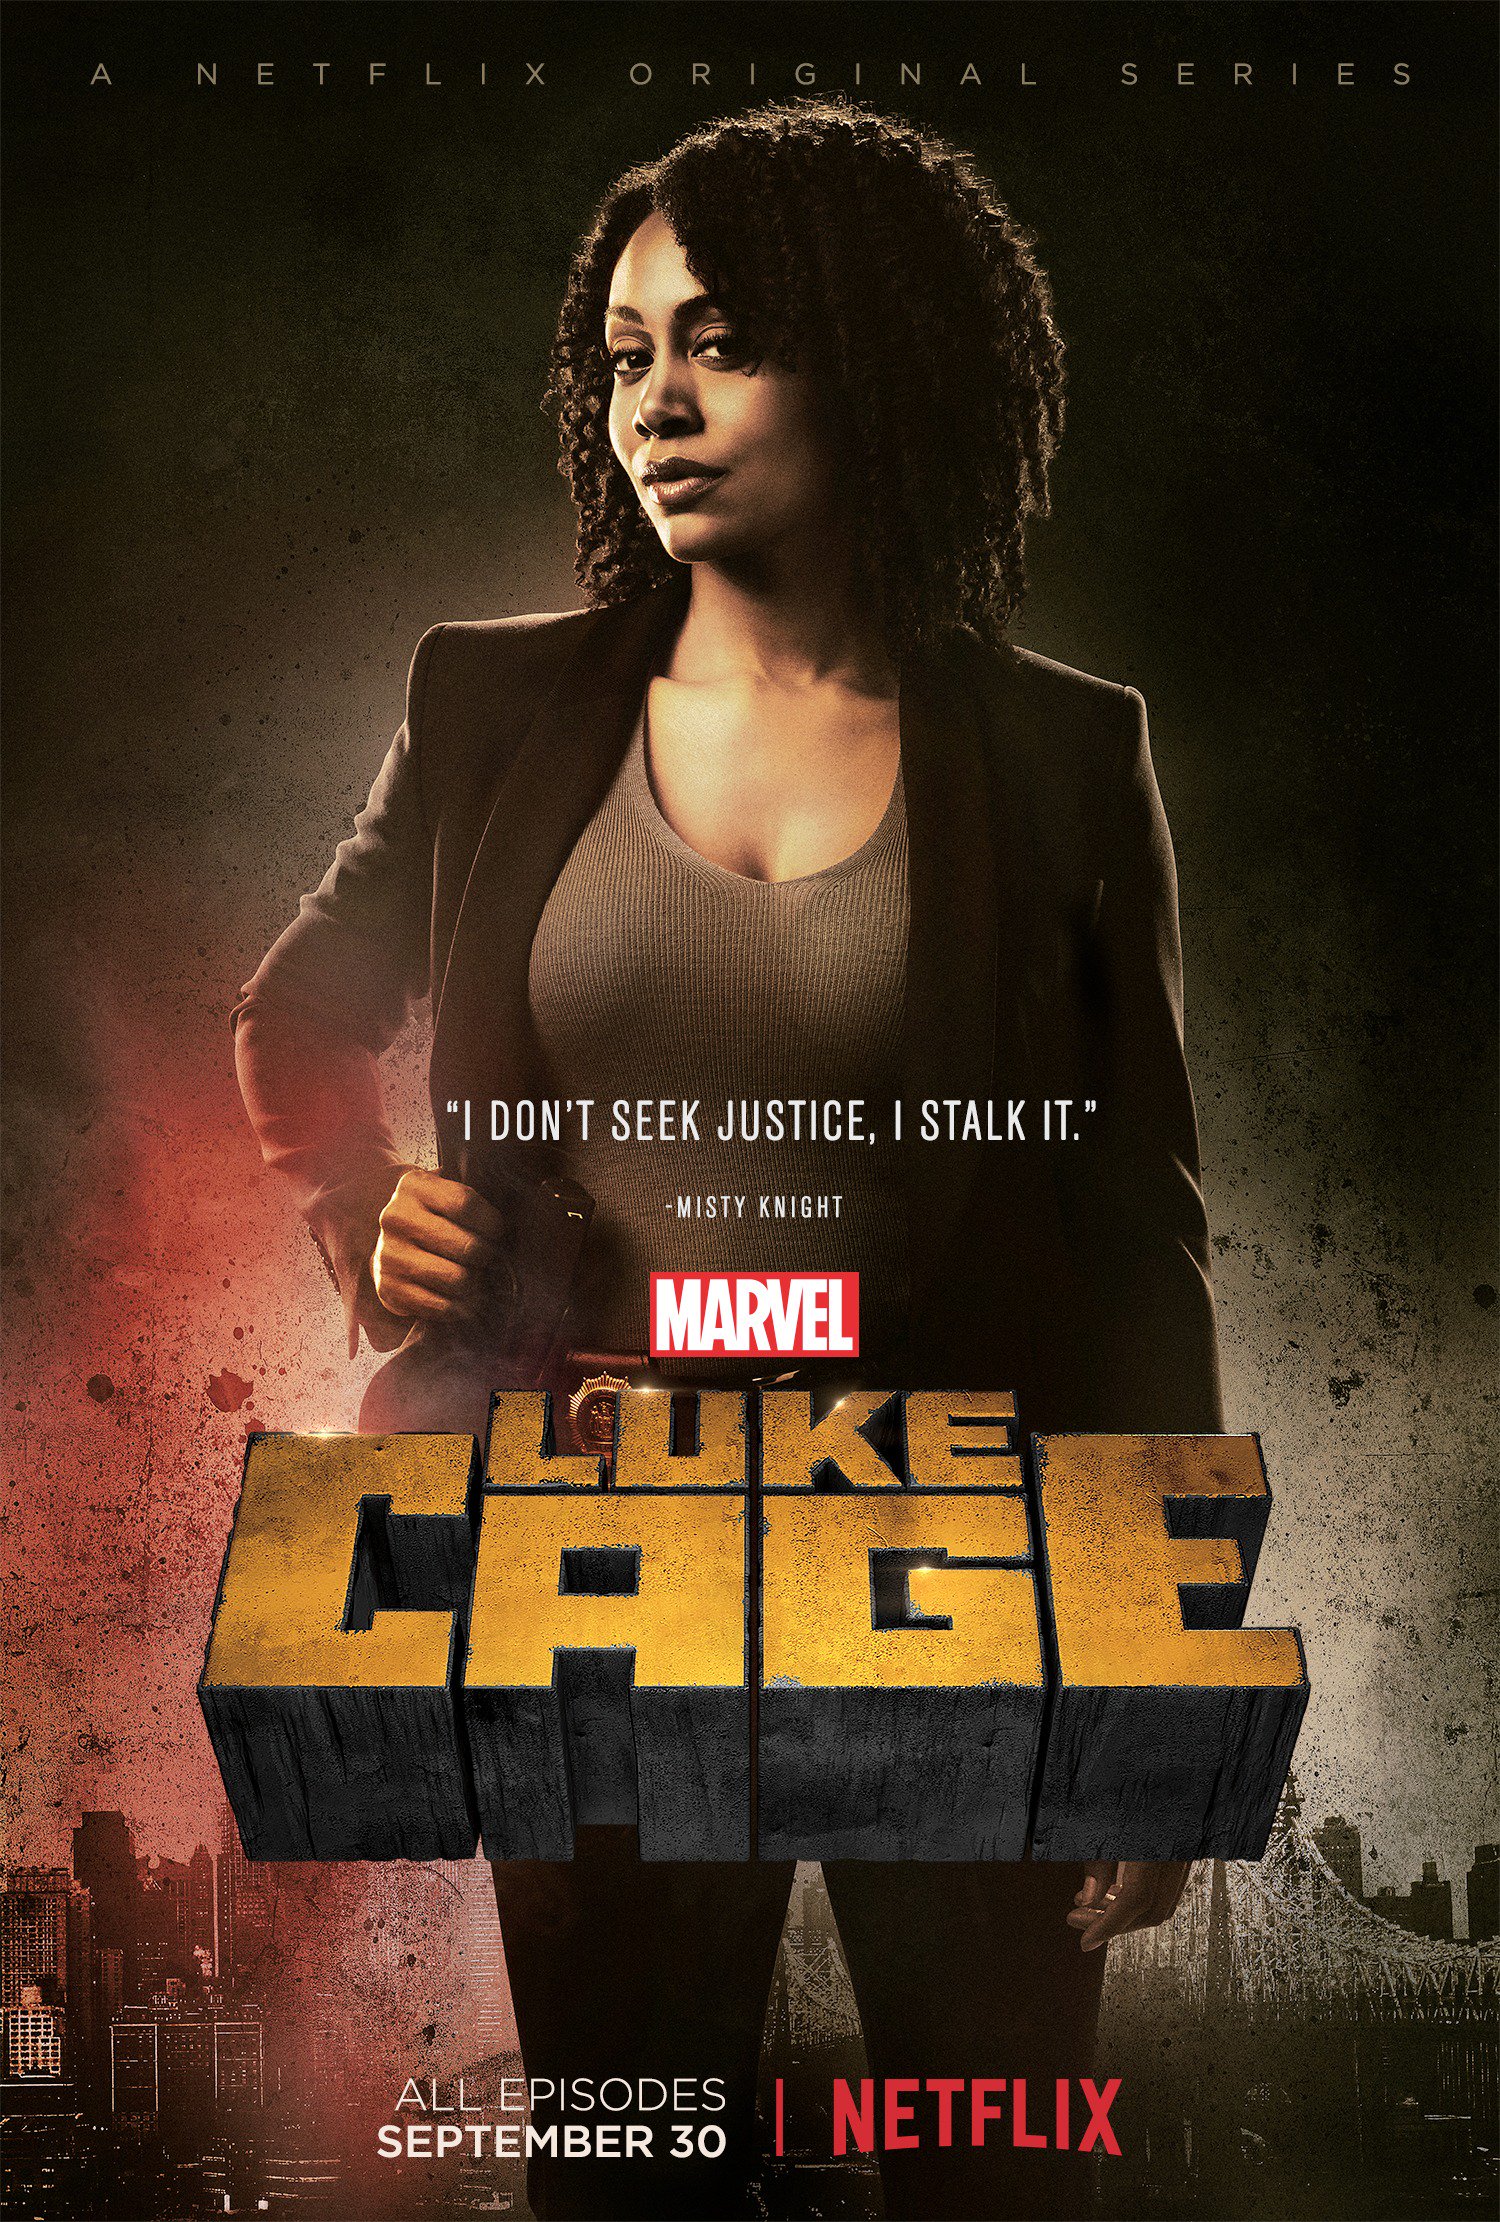 New Luke Cage Posters For Claire Temple and Misty Knight